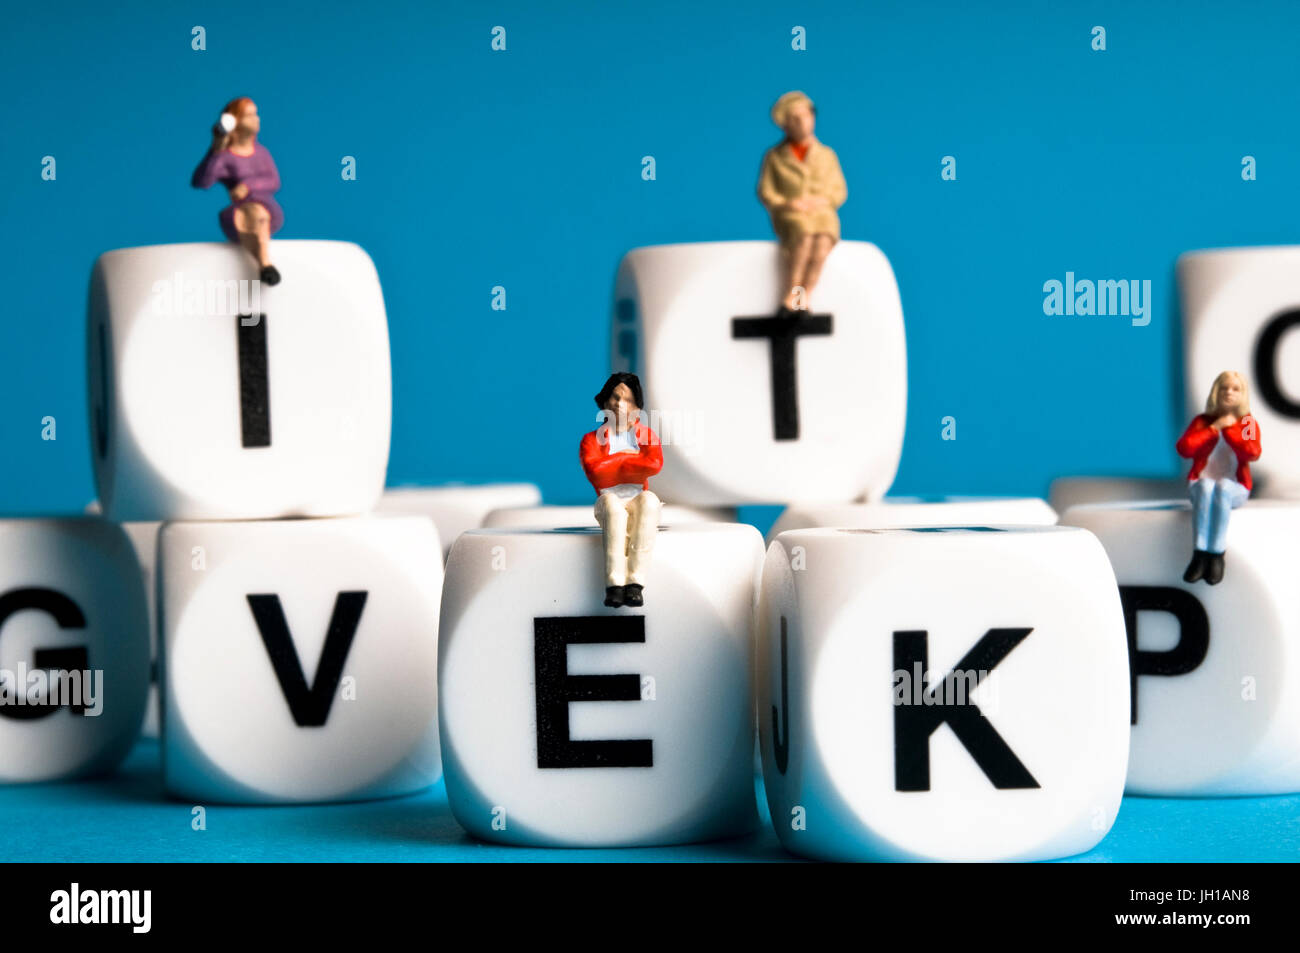 miniature figurines of people sitting on dice with letters, communication, education, socializing concept Stock Photo